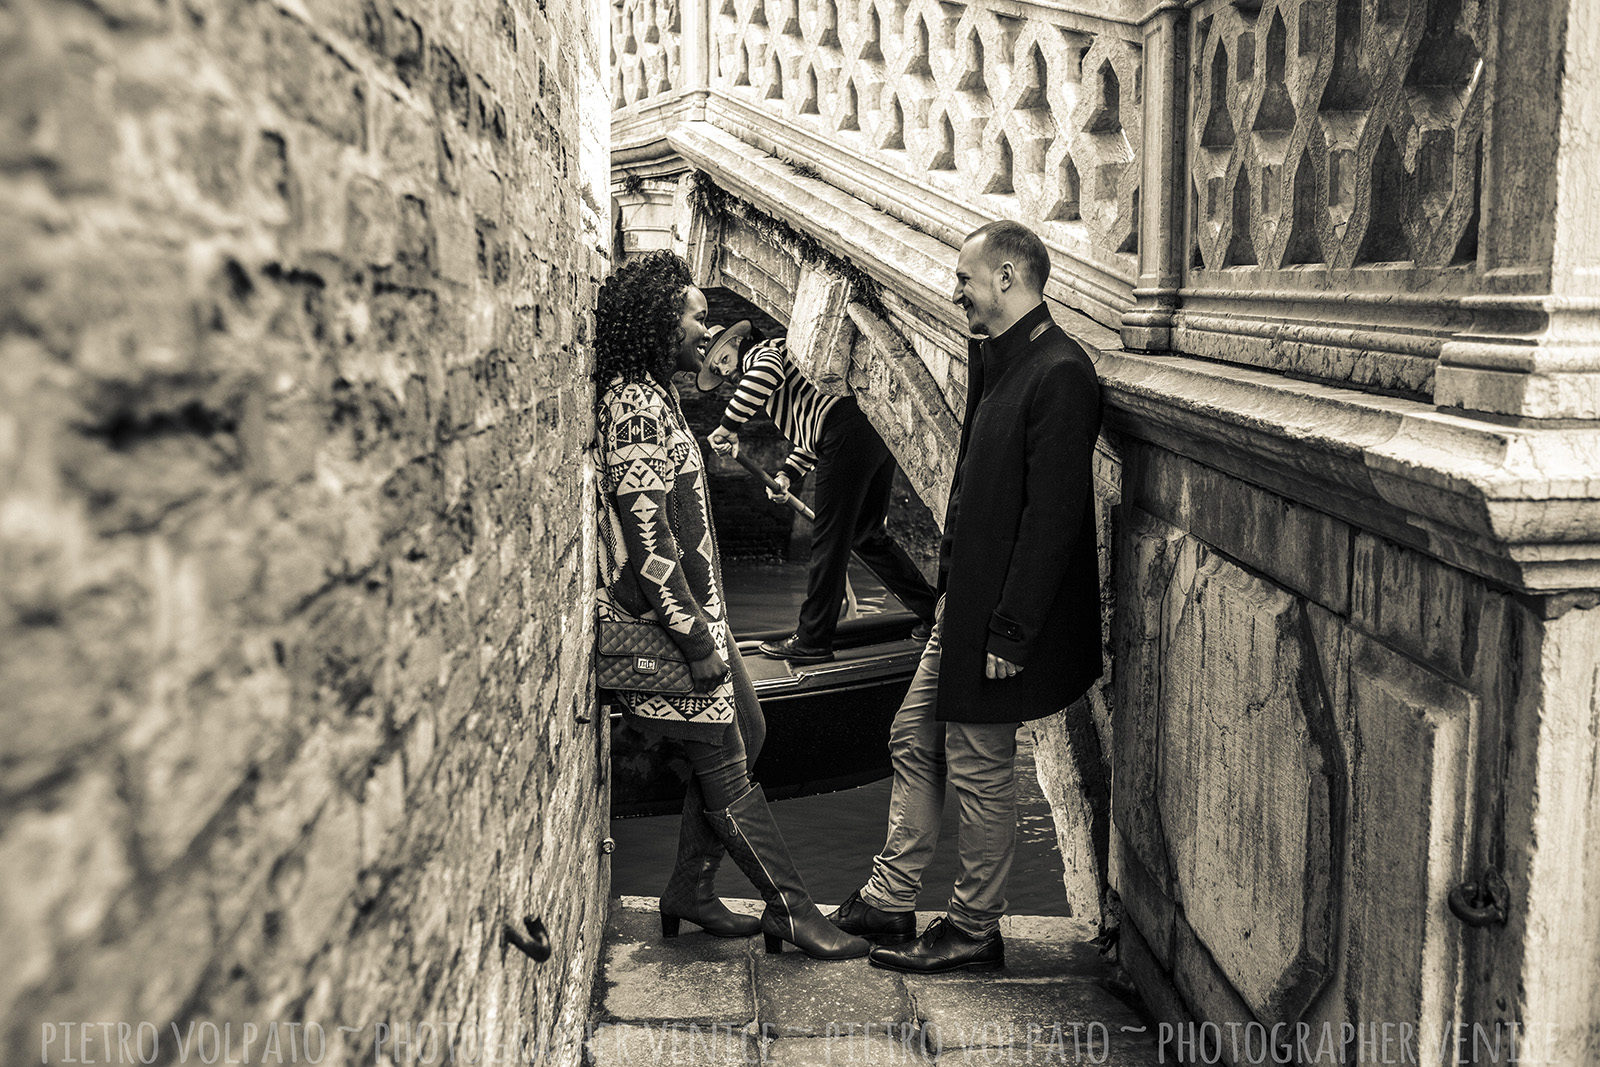 Photographer in Venice for vacation couple photo shoot ~ Having fun and romantic pictures during a walking tour in Venice Italy